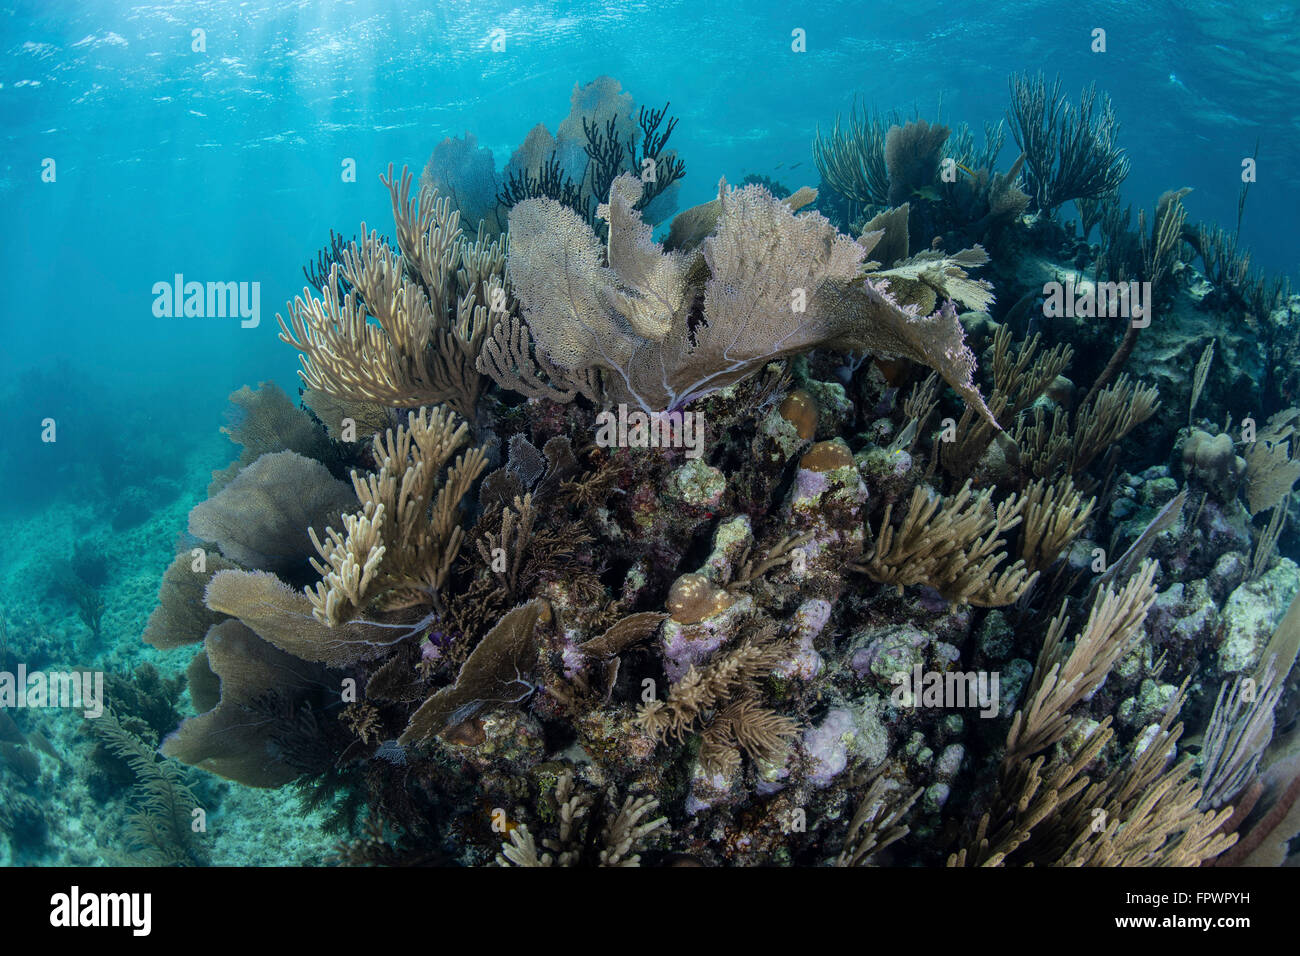 A colorful set of gorgonians, reef-building corals, and other invertebrates grow on a diverse reef in the Caribbean Sea. Stock Photo